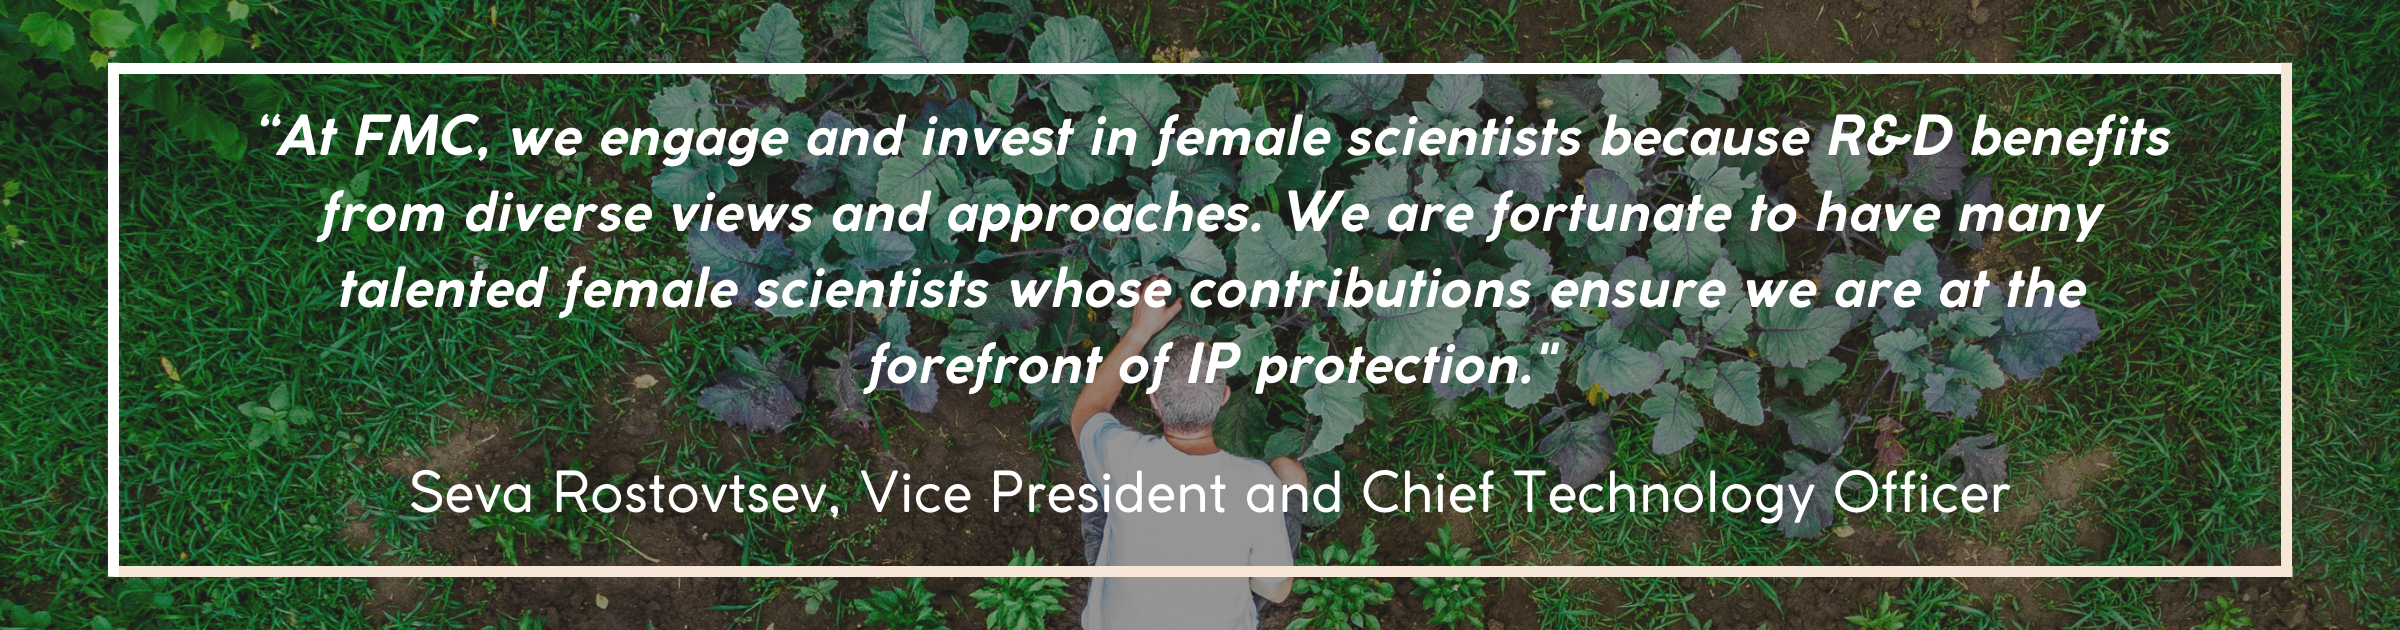 “At FMC, we engage and invest in female scientists because R&D benefits from diverse views and approaches. We are fortunate to have many talented female scientists whose contributions ensure we are at the forefront of IP protection.’ – Seva Rostovtsev, Vice President and Chief Technology Officer